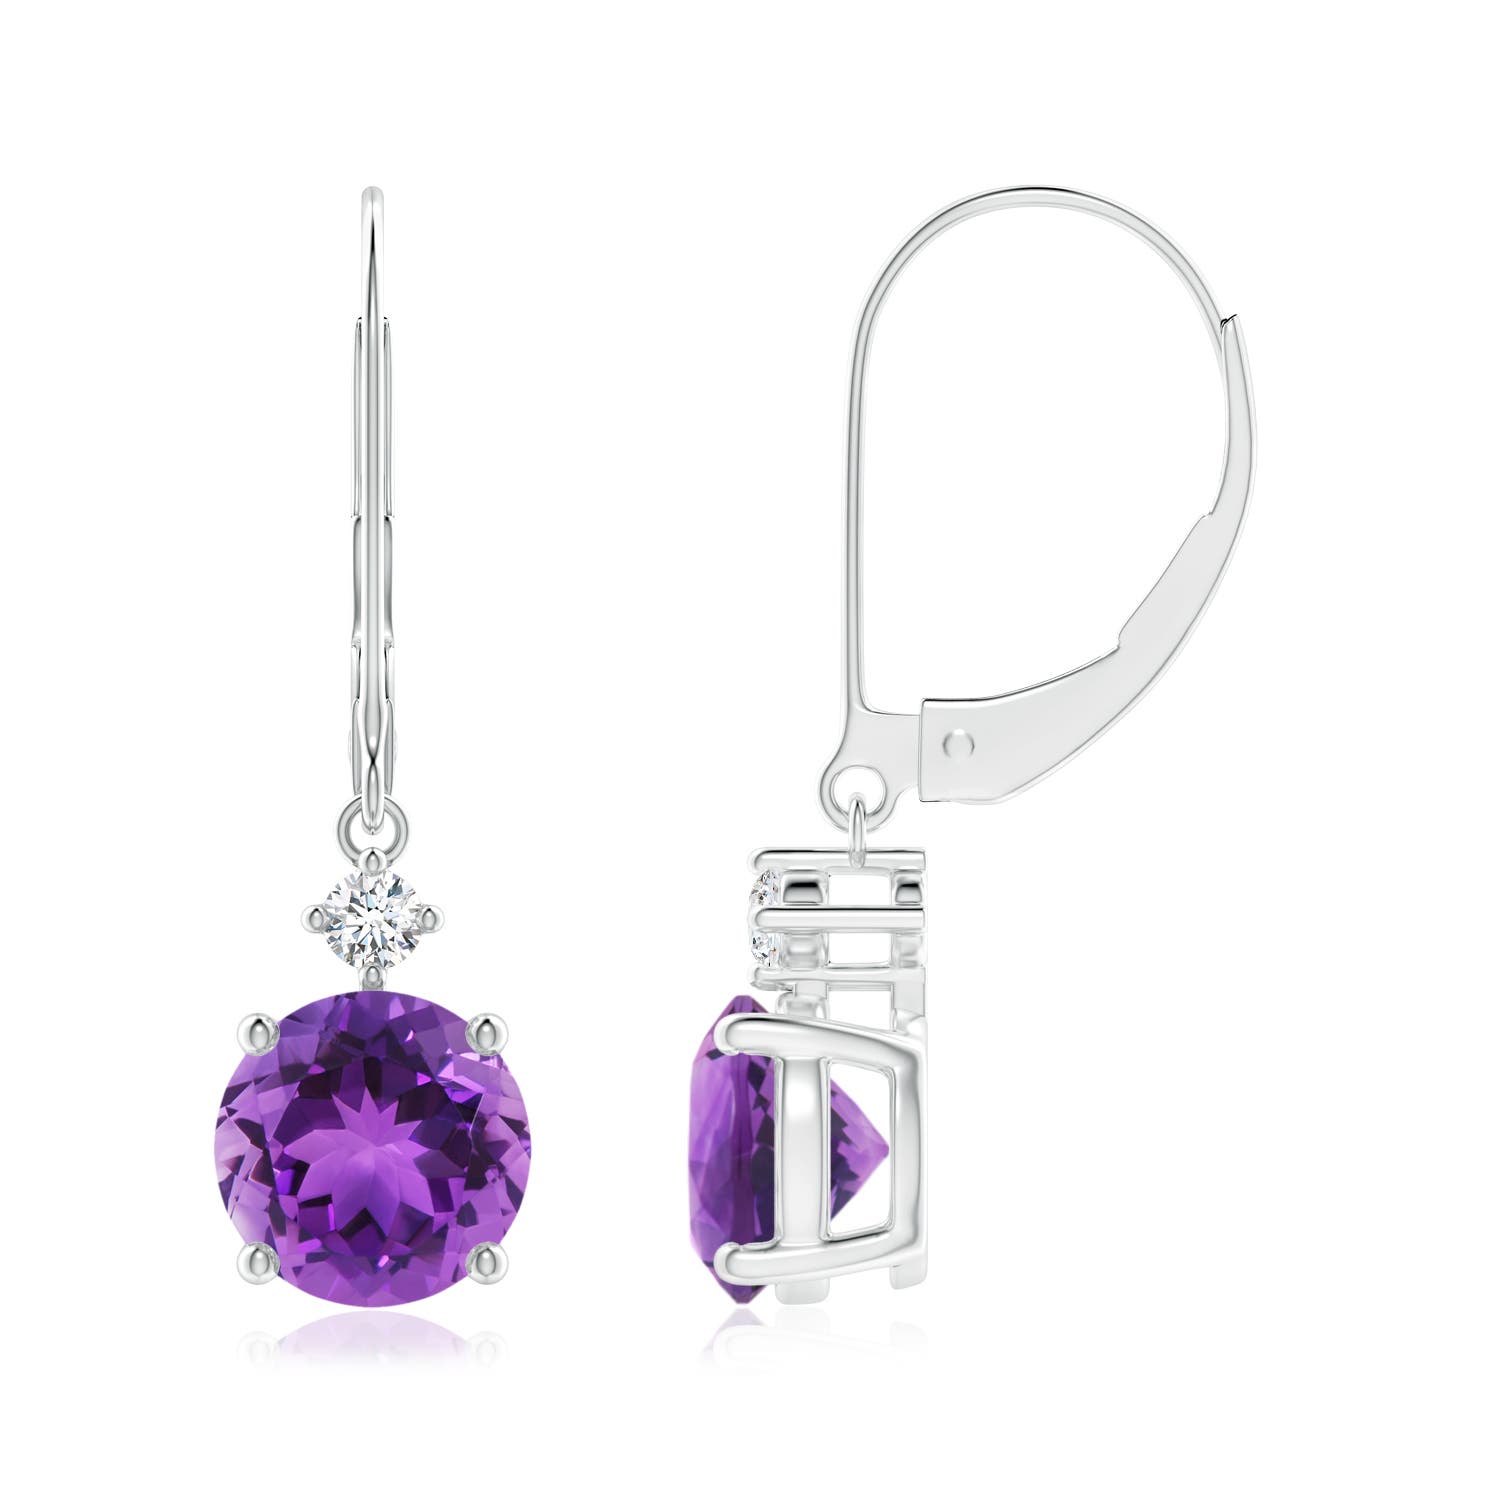 AAA - Amethyst / 2.39 CT / 14 KT White Gold